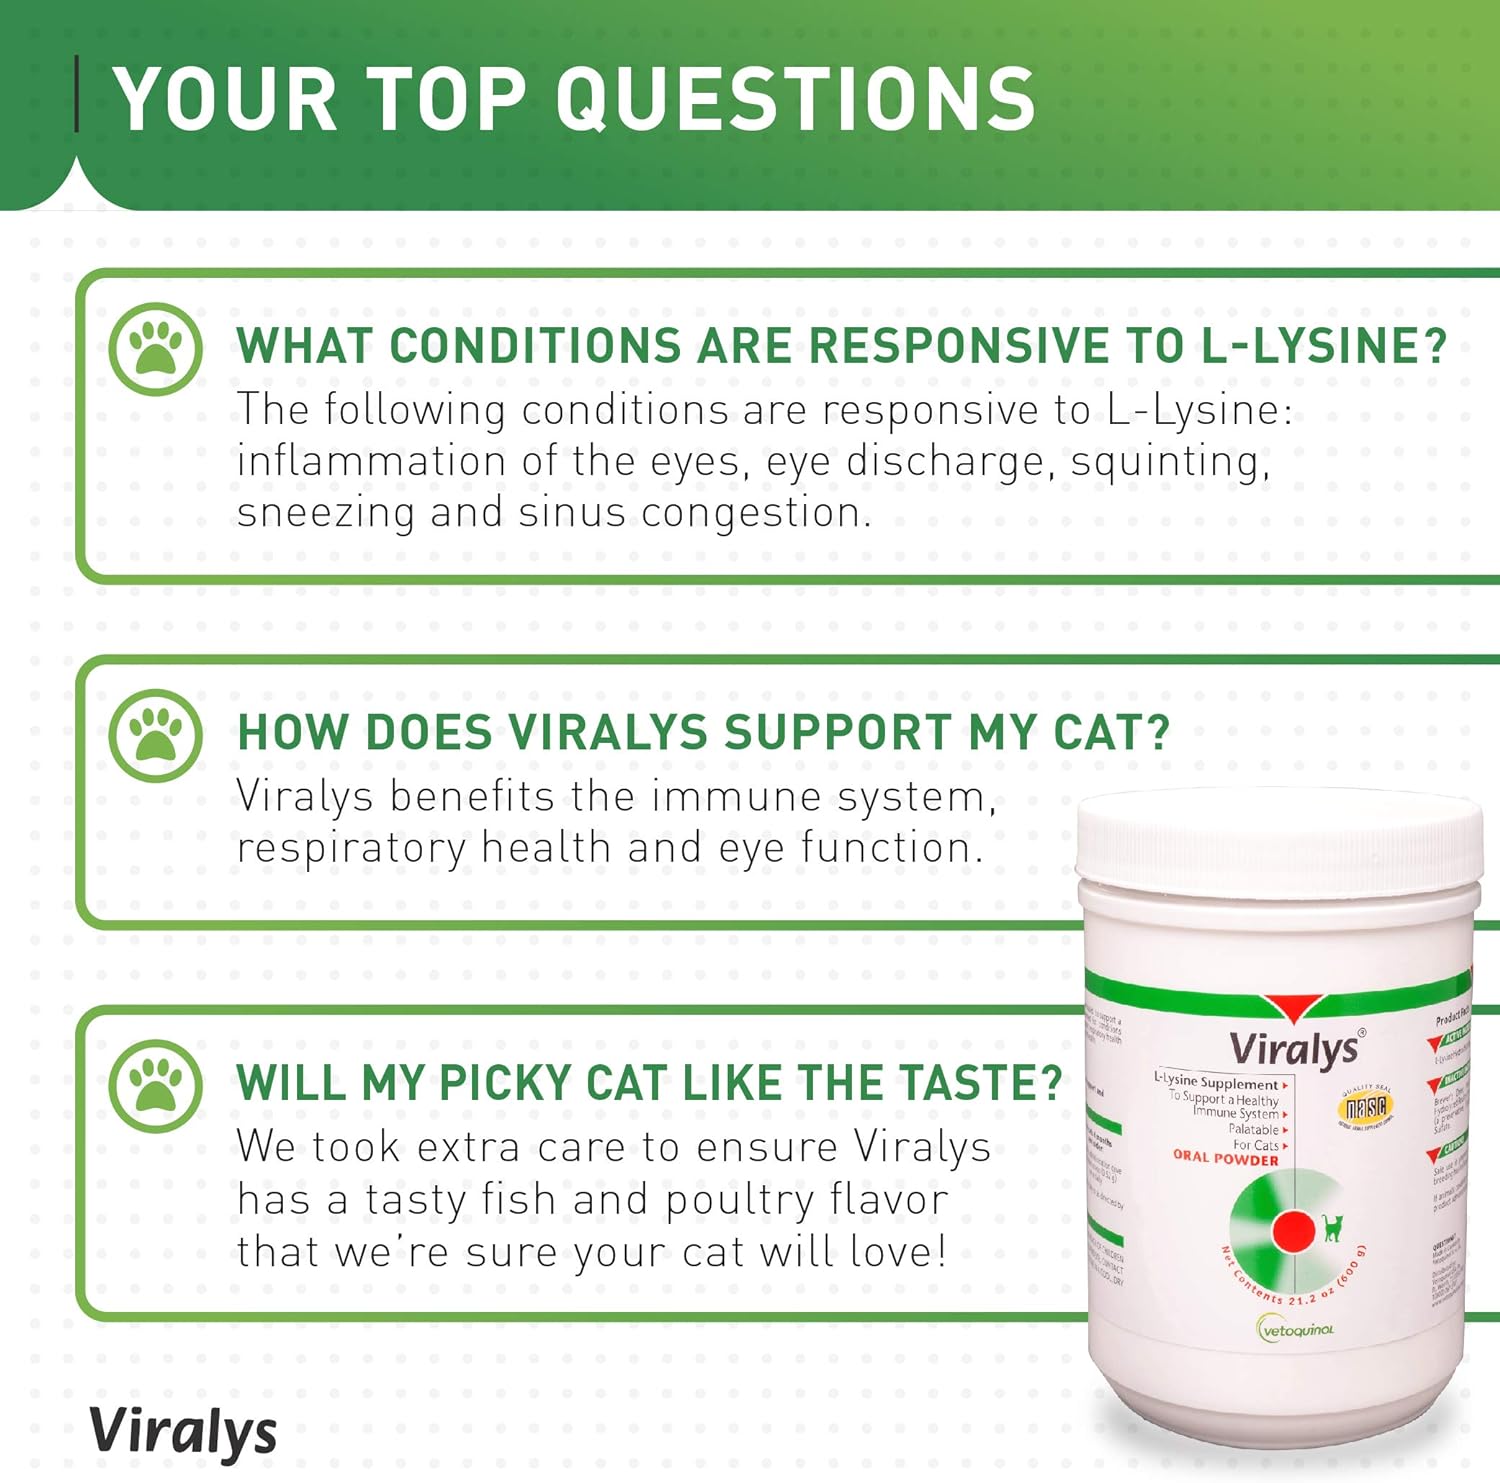 Vetoquinol Viralys L-Lysine Supplement for Cats, 21oz/600g - Cats & Kittens of All Ages - Immune Health - Sneezing, Runny Nose, Squinting, Watery Eyes - Palatable Fish & Poultry Flavored Lysine Powder : L Lysine Nutritional Supplements : Pet Supplies